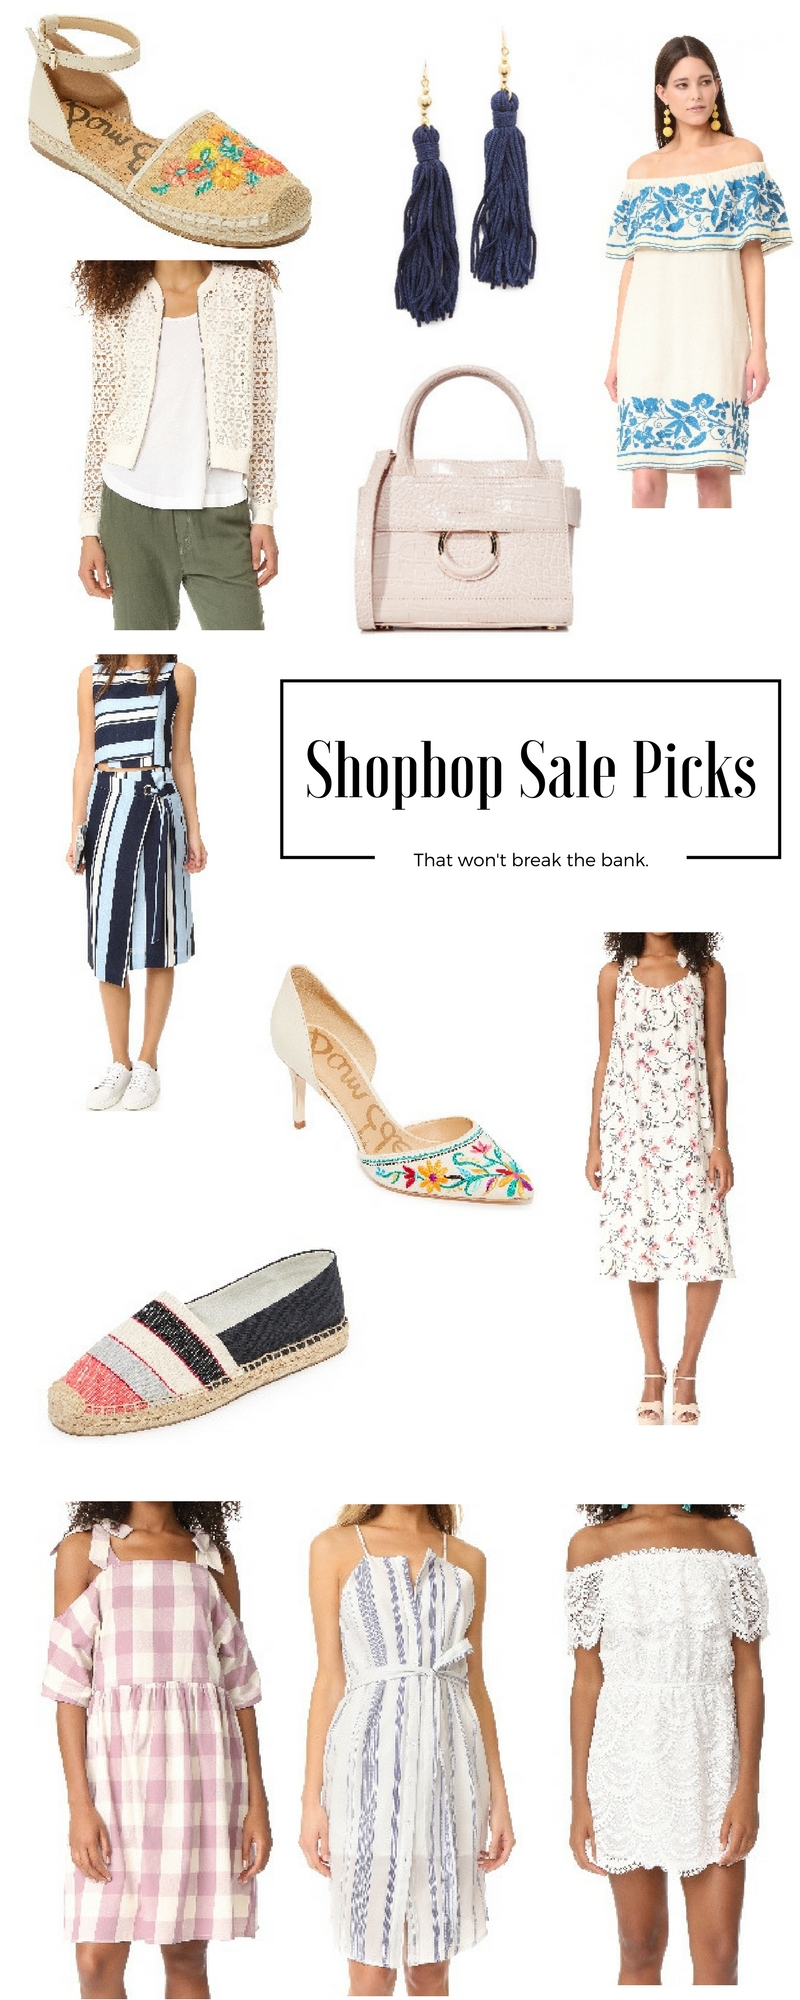 Shopbop Sale – Fashionable finds for less